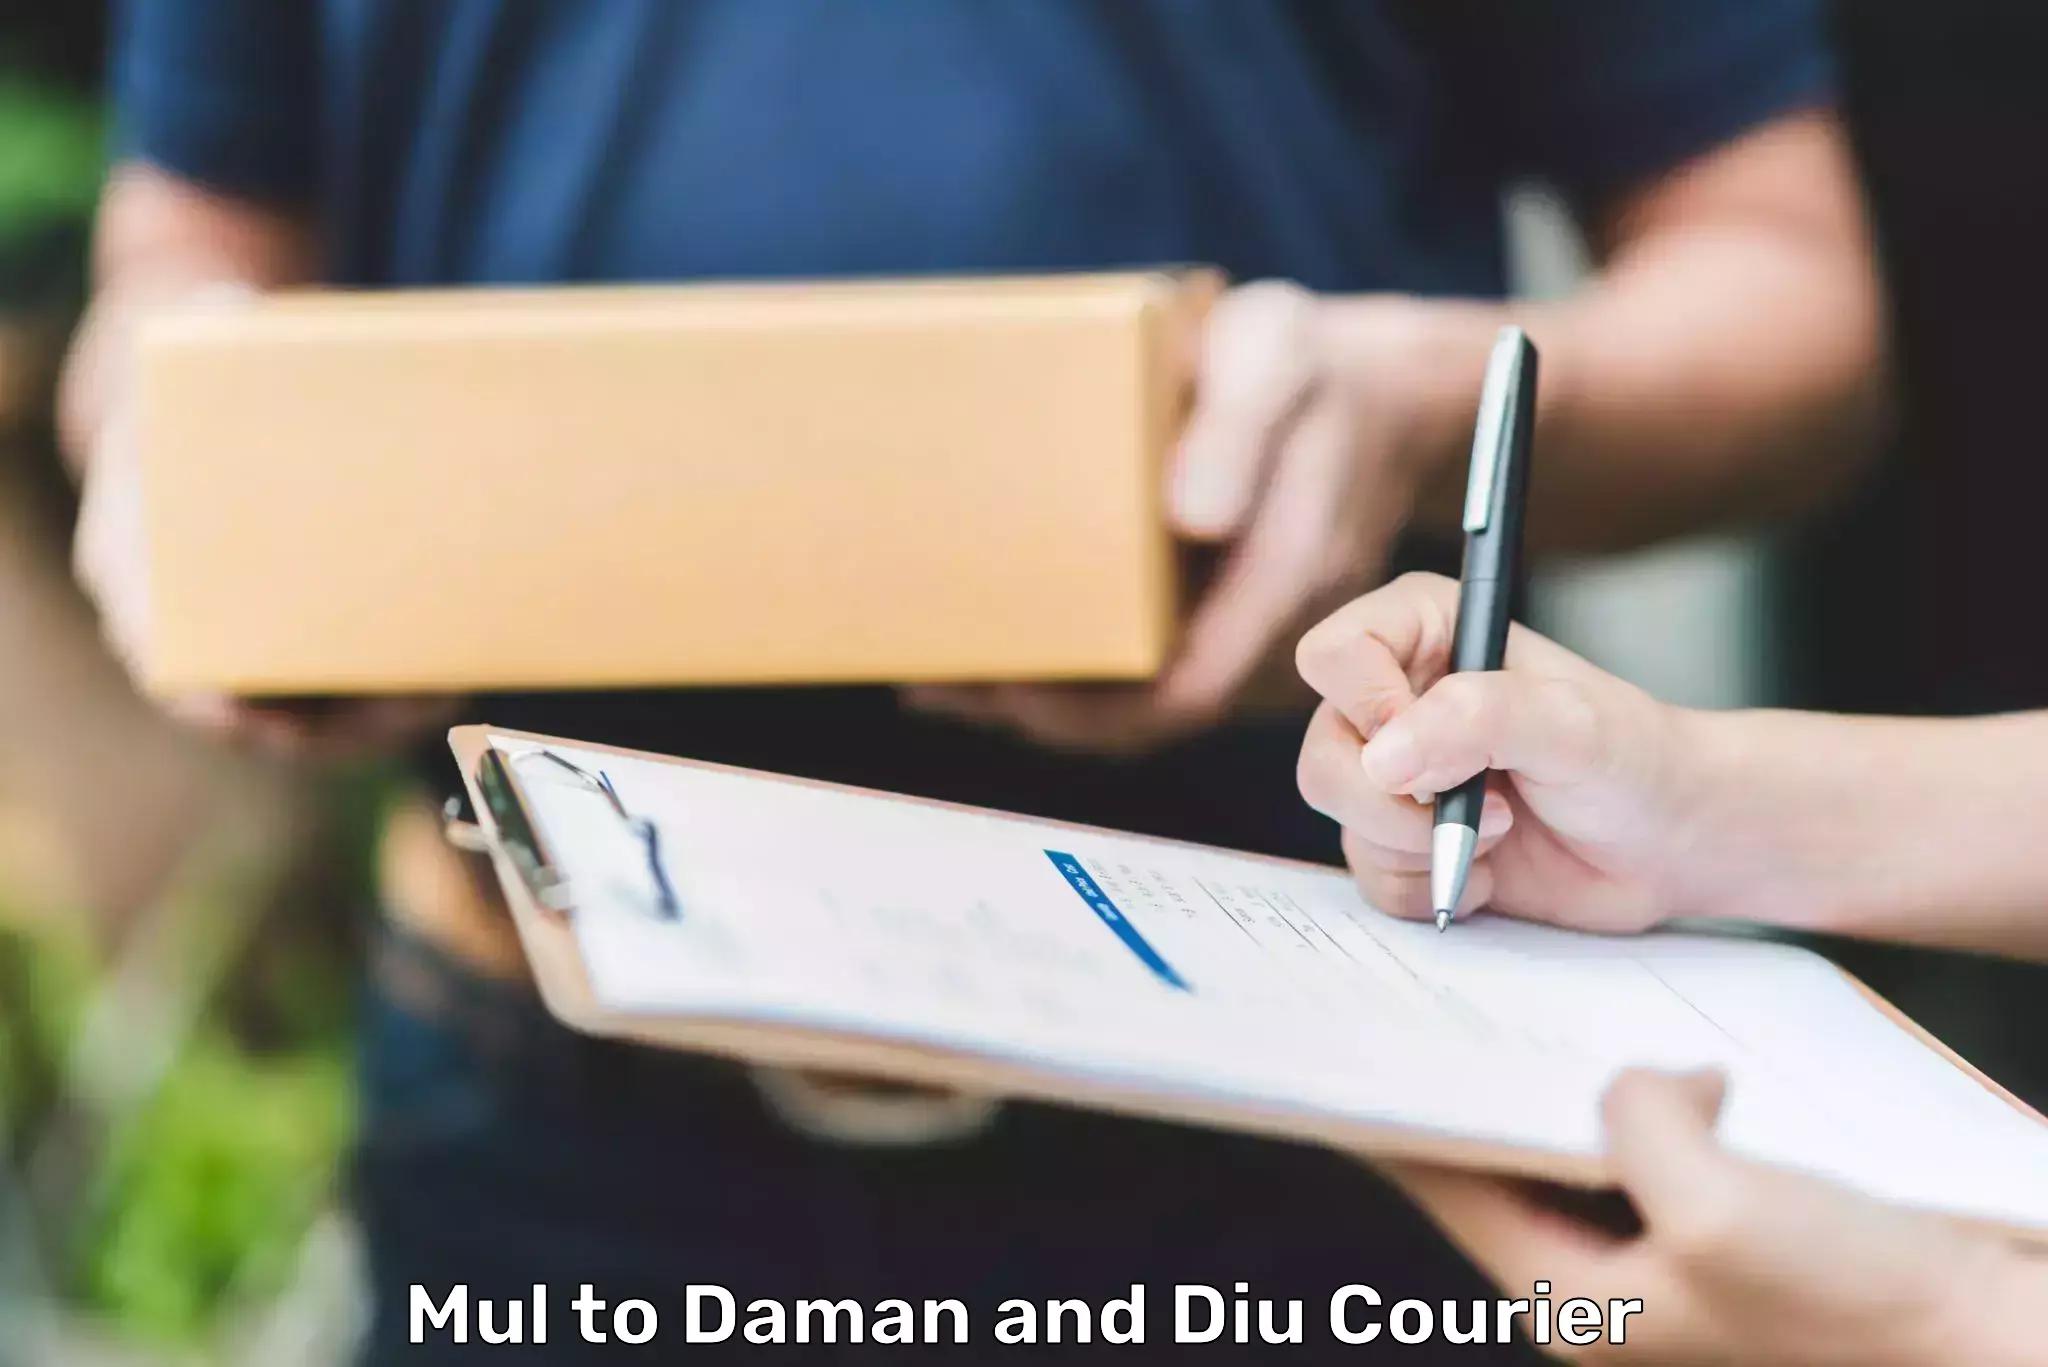 Comprehensive shipping network Mul to Daman